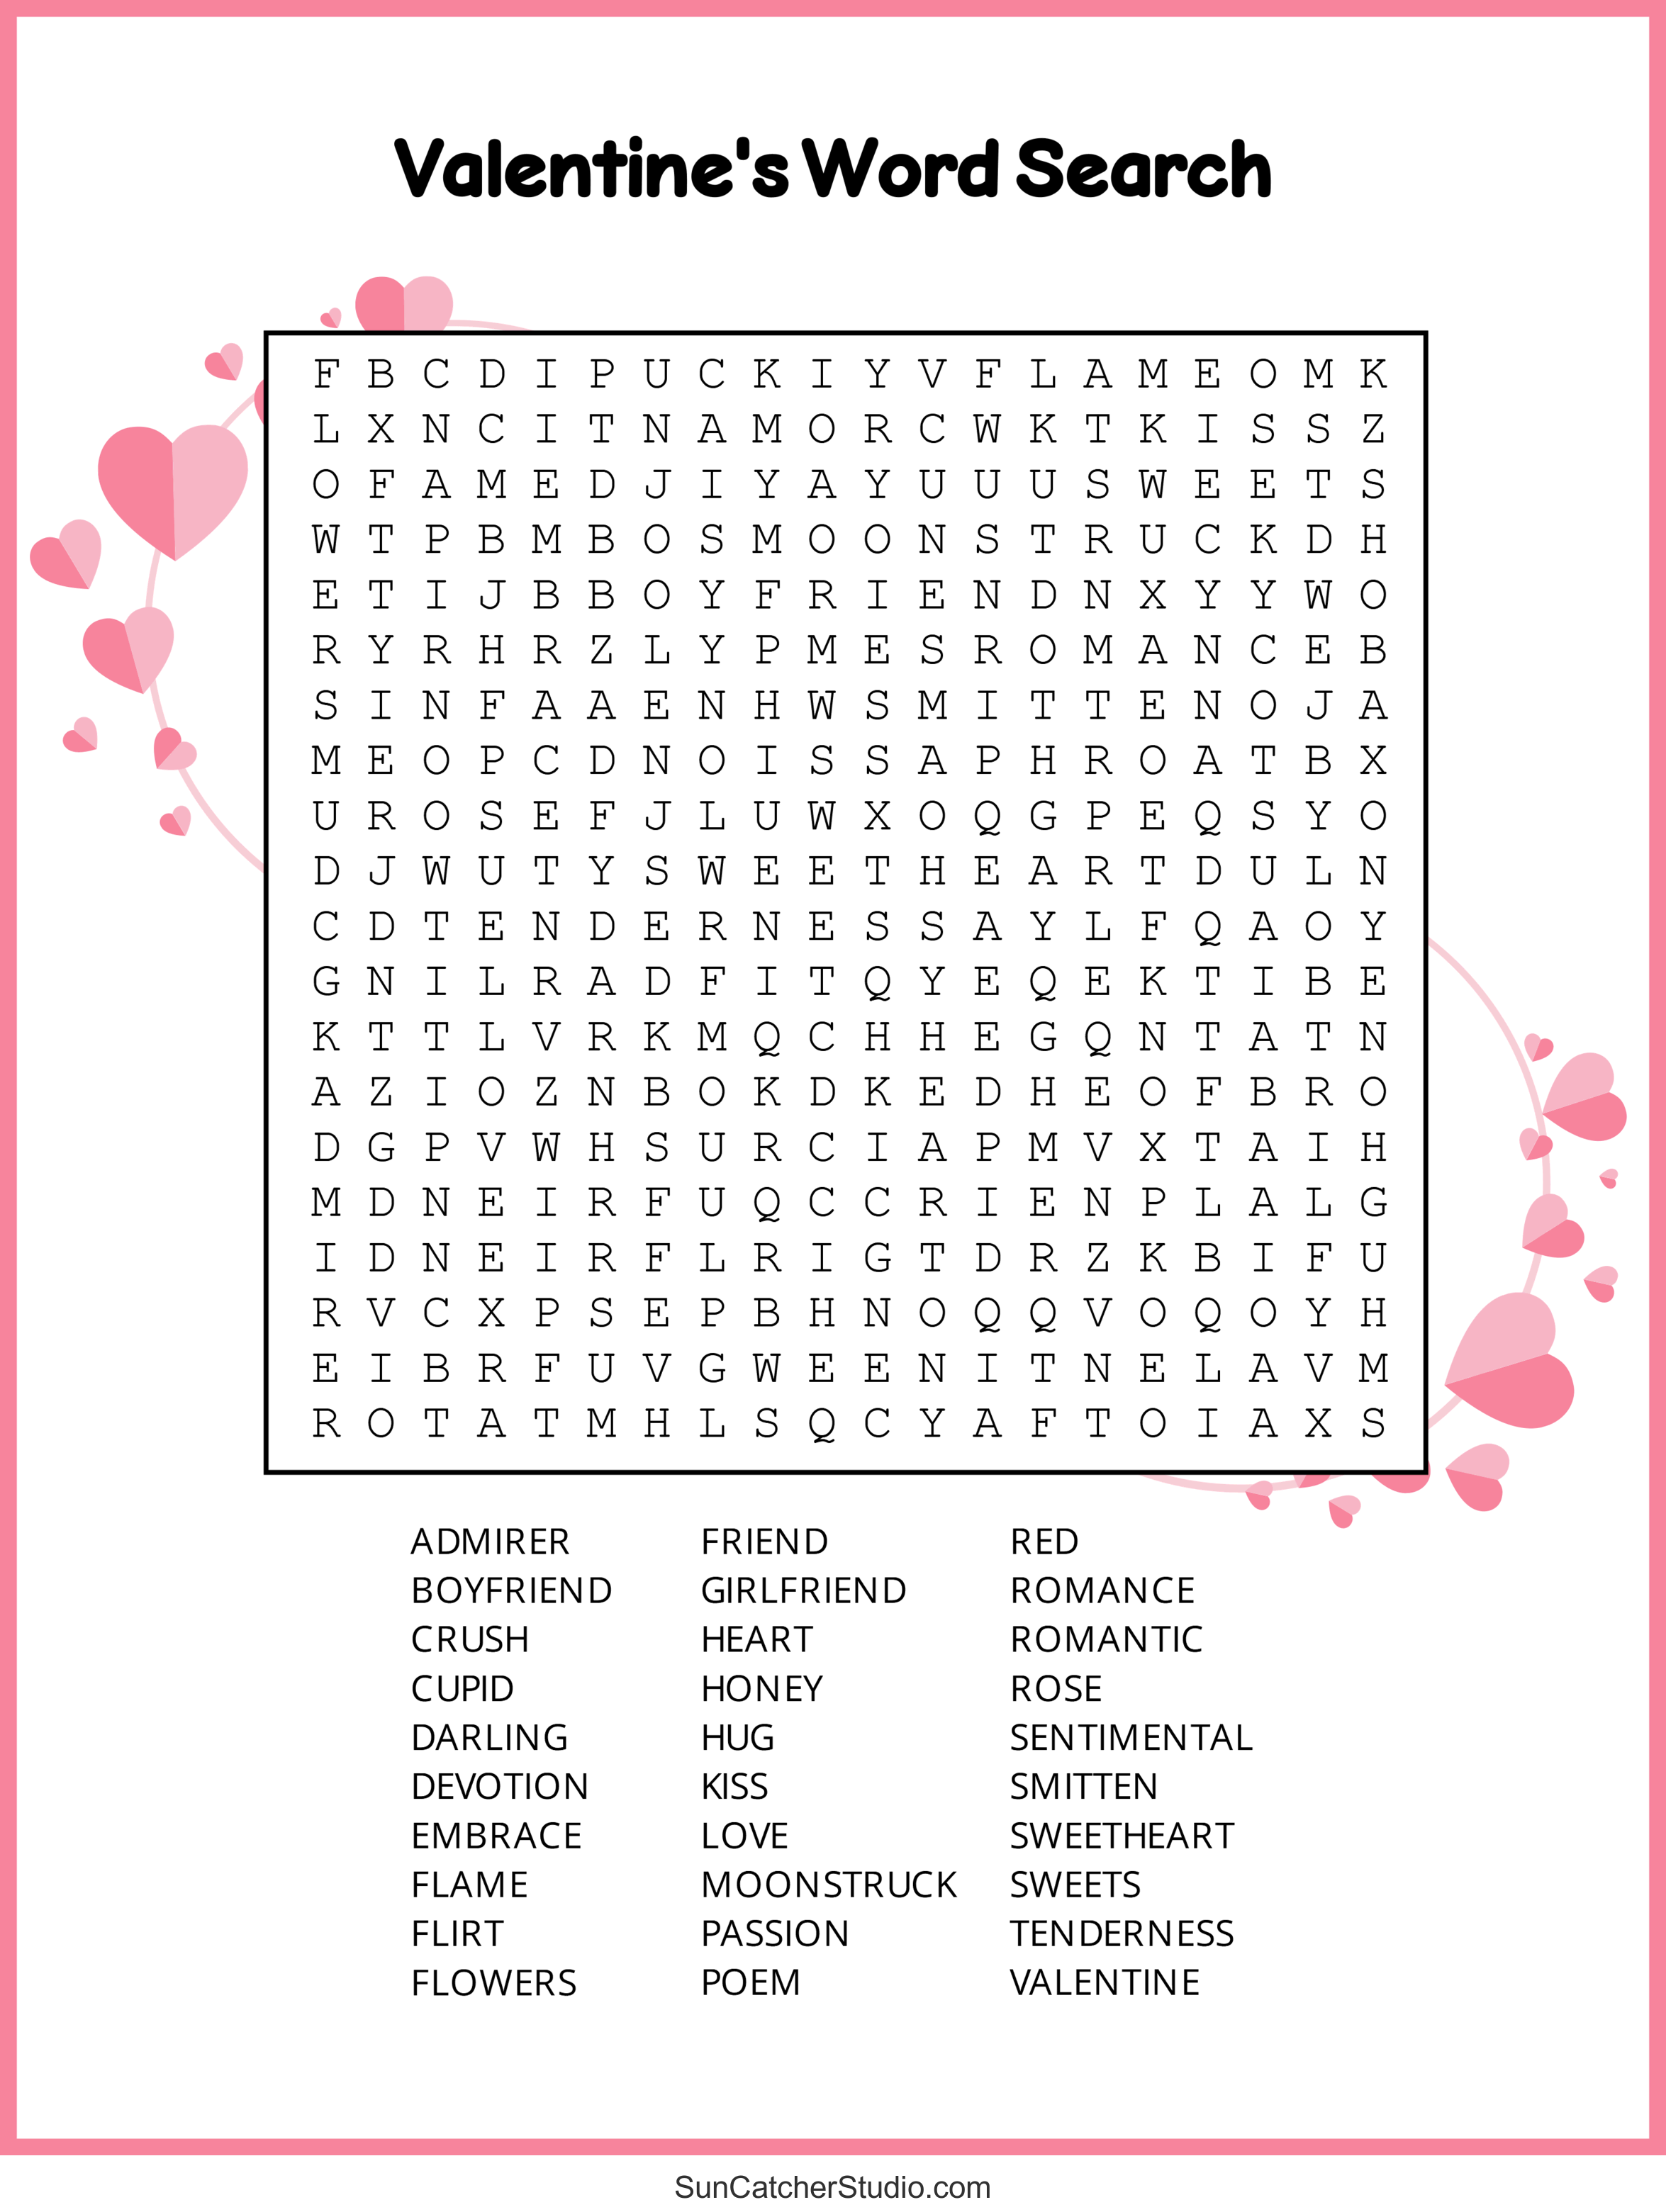 Valentine s Day Word Search Free Printable PDF Puzzles DIY Projects Patterns Monograms Designs Templates